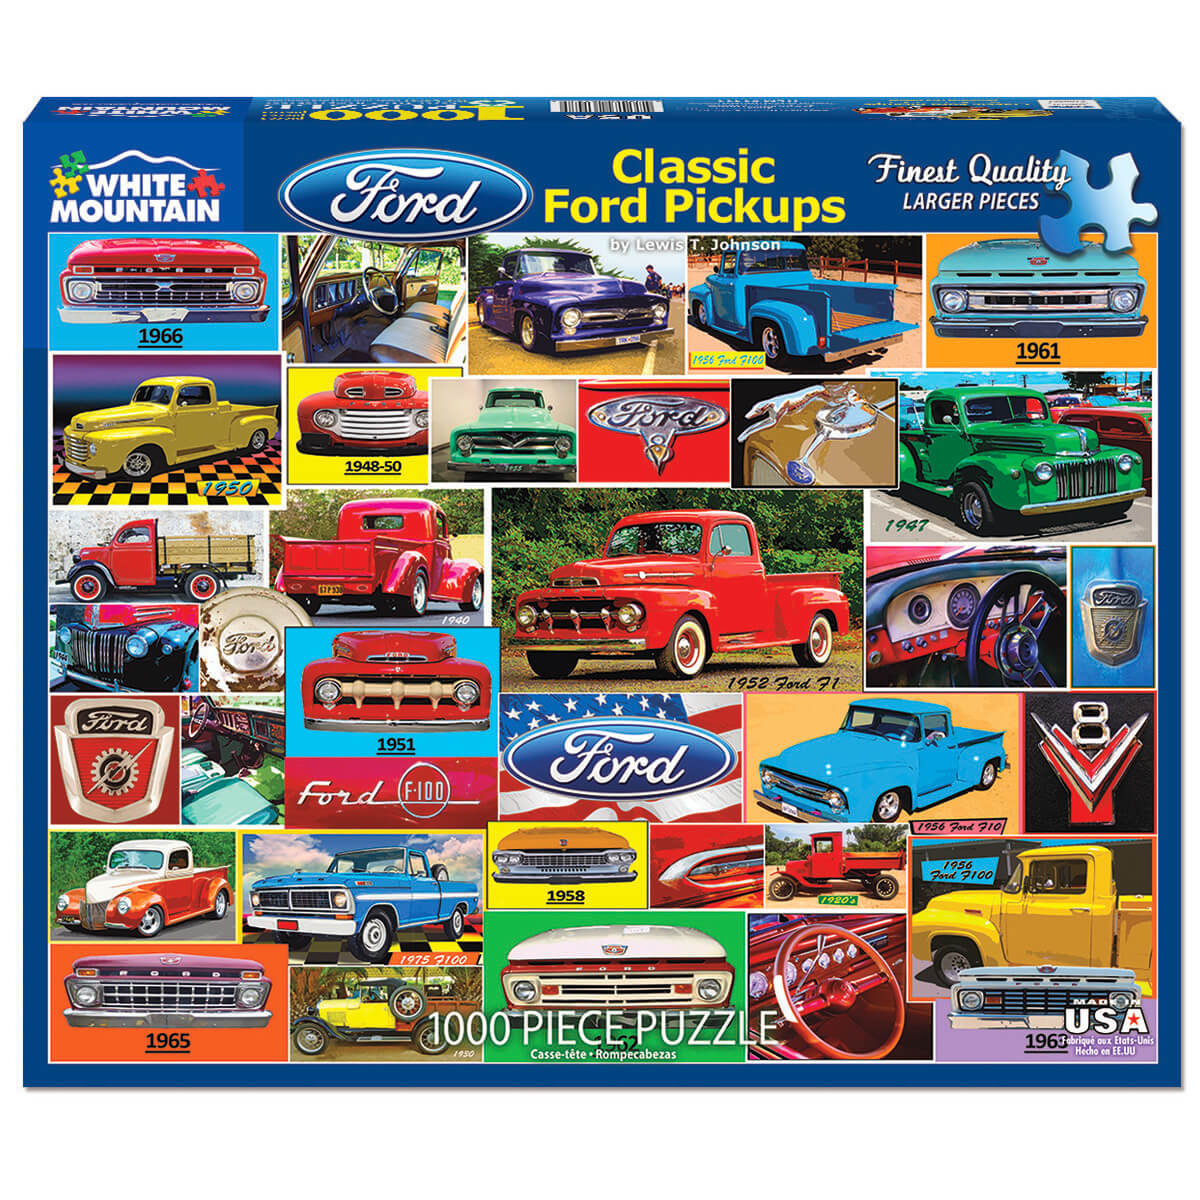 White Mountain Puzzles Classic Ford Pickups 1000 Piece Jigsaw Puzzle